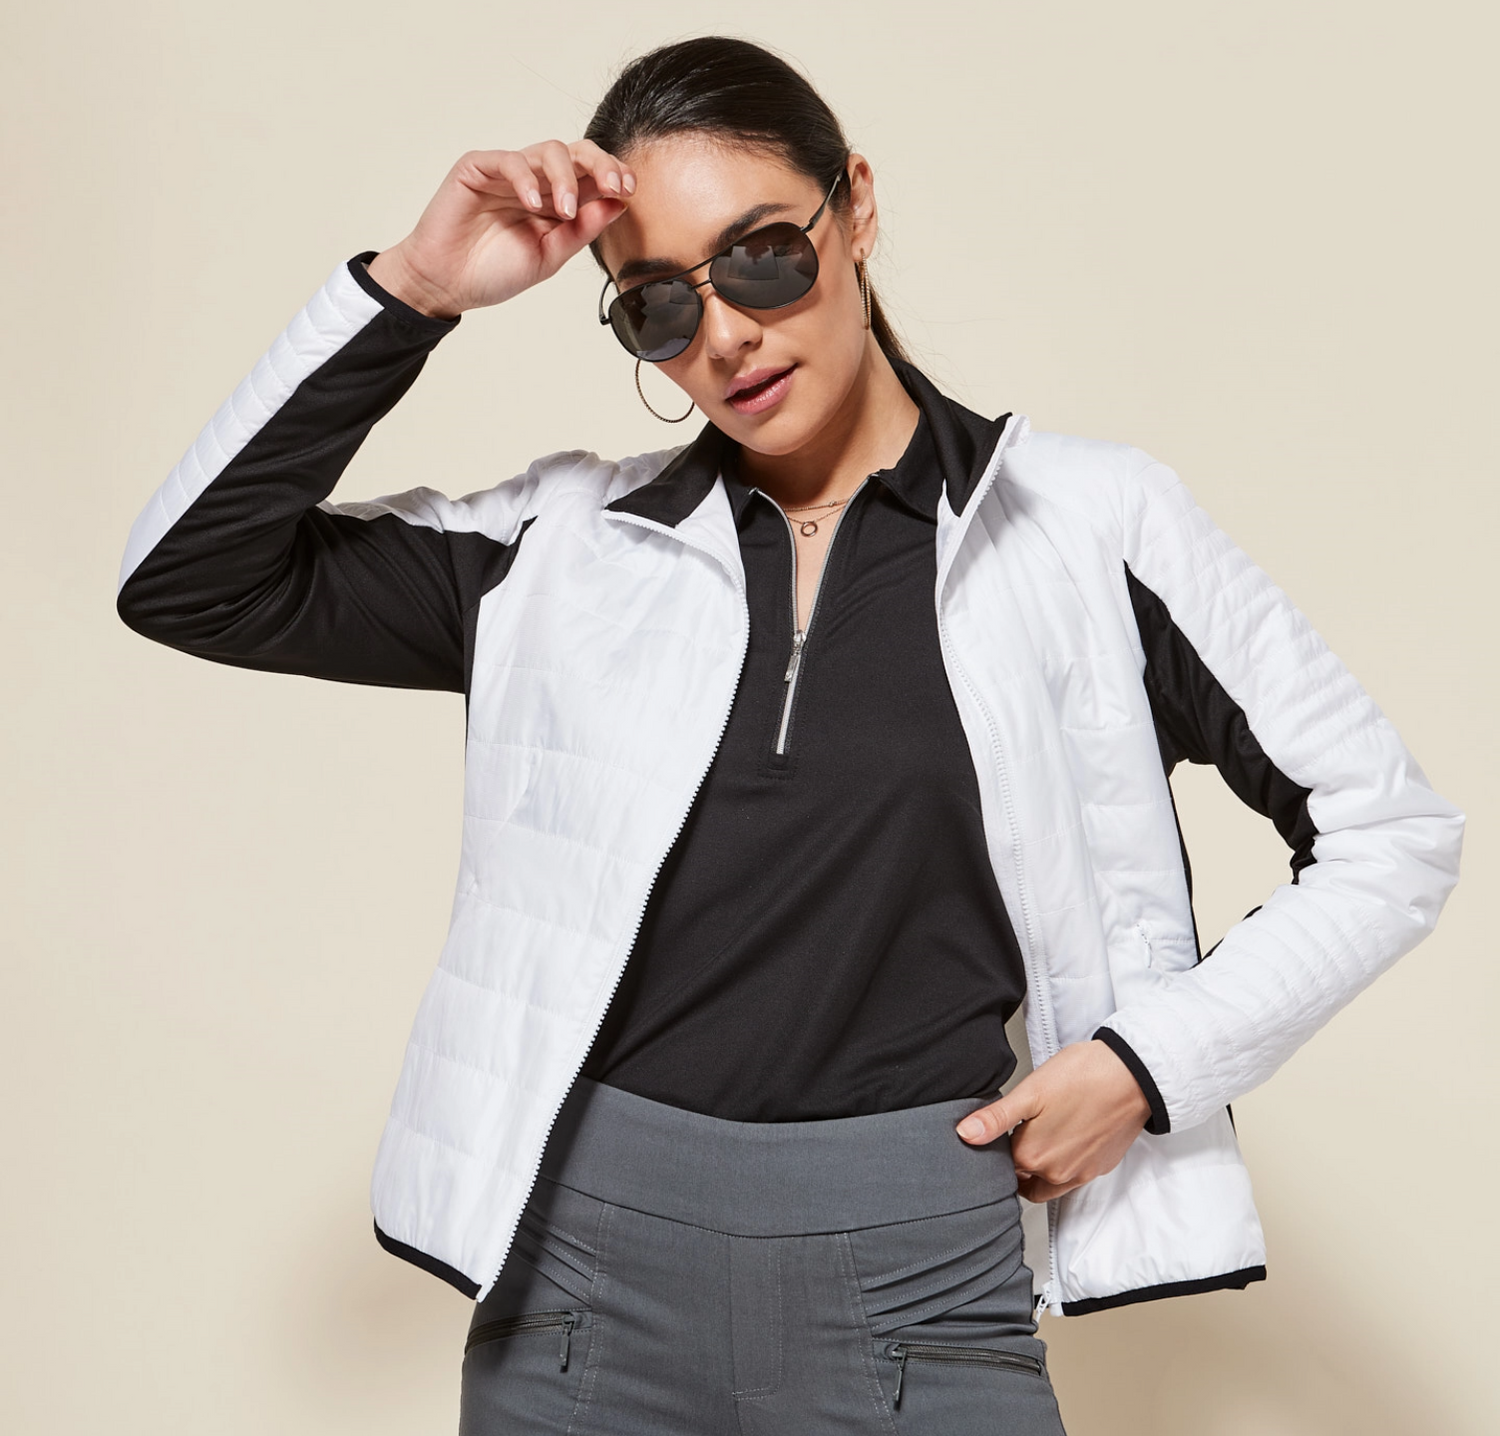 Model posing in sunglasses, black top, gray golf pants, and white jacket